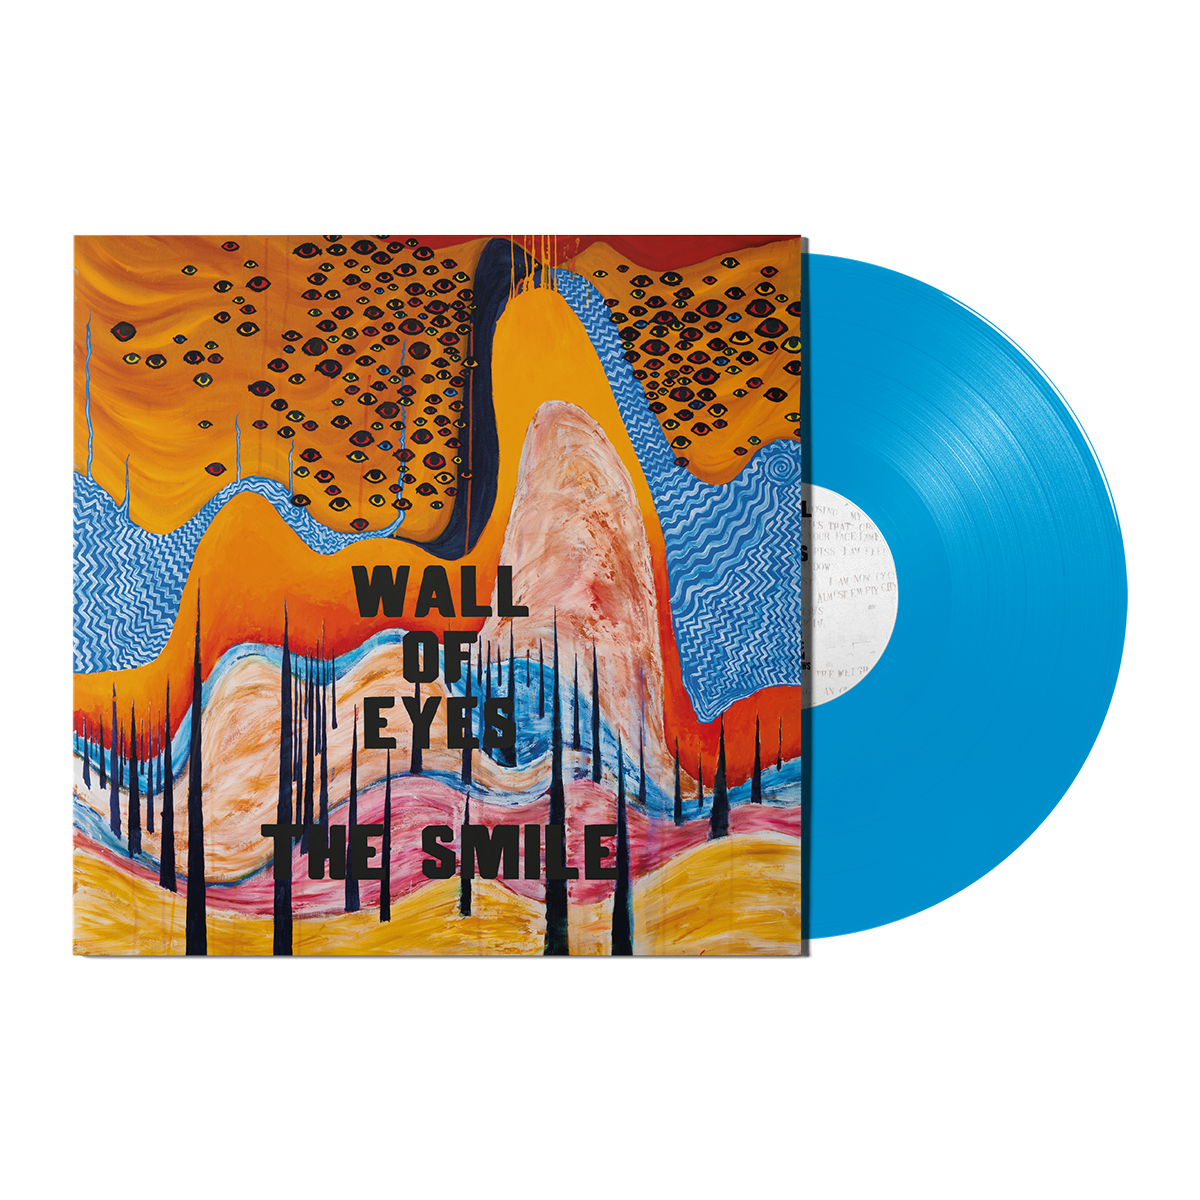 Wall of Eyes Limited Sky Blue Vinyl edition